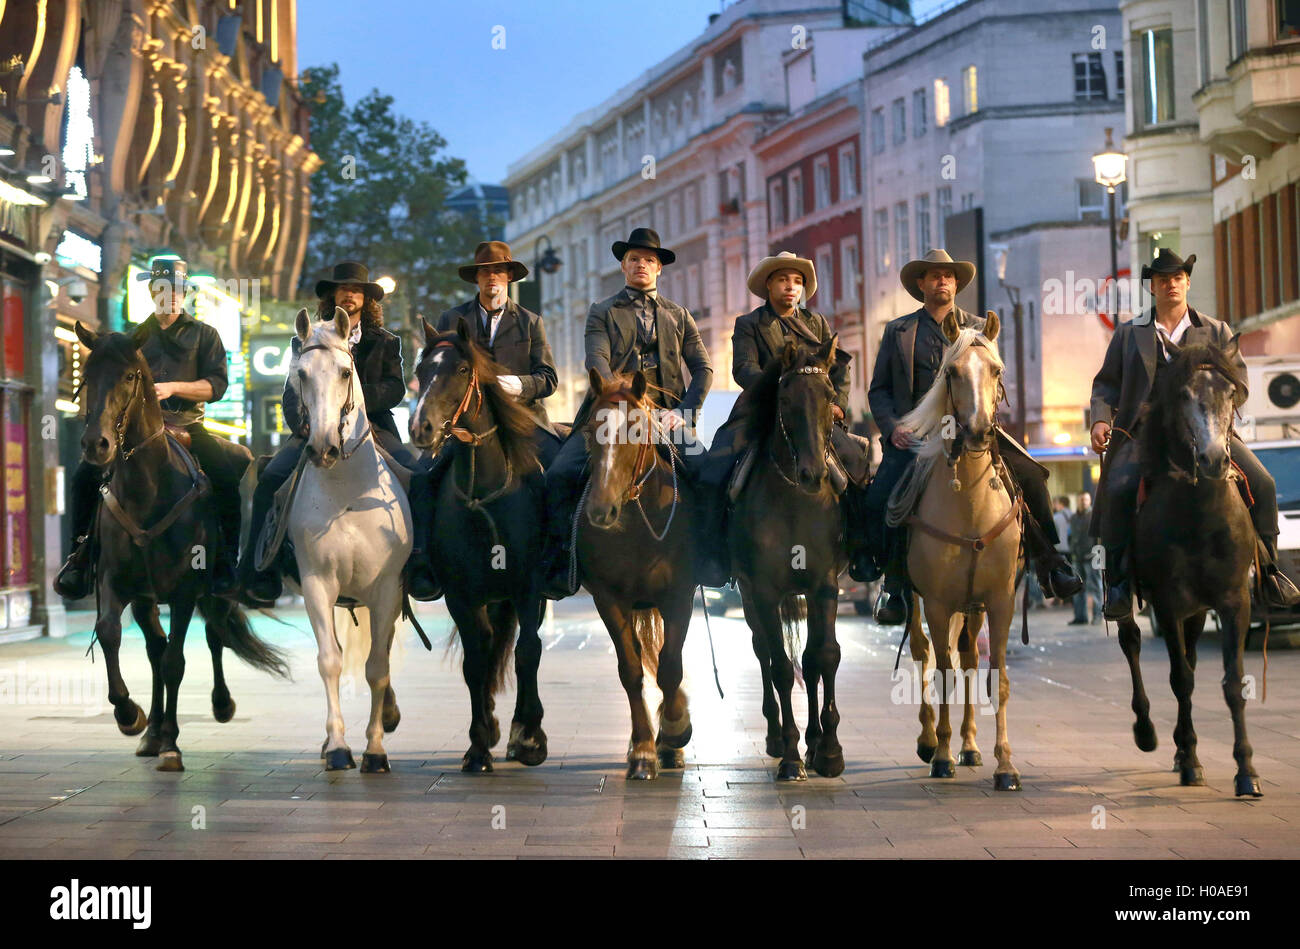 Seven horse riders, dressed as cowboys, arrive in London's Leicester Square ahead of a screening of the new film The Magnificent Seven, which stars Denzel Washington, Chris Pratt and Ethan Hawke and is released in cinemas in the UK and Ireland this Friday 23rdÃŠSeptember. Stock Photo